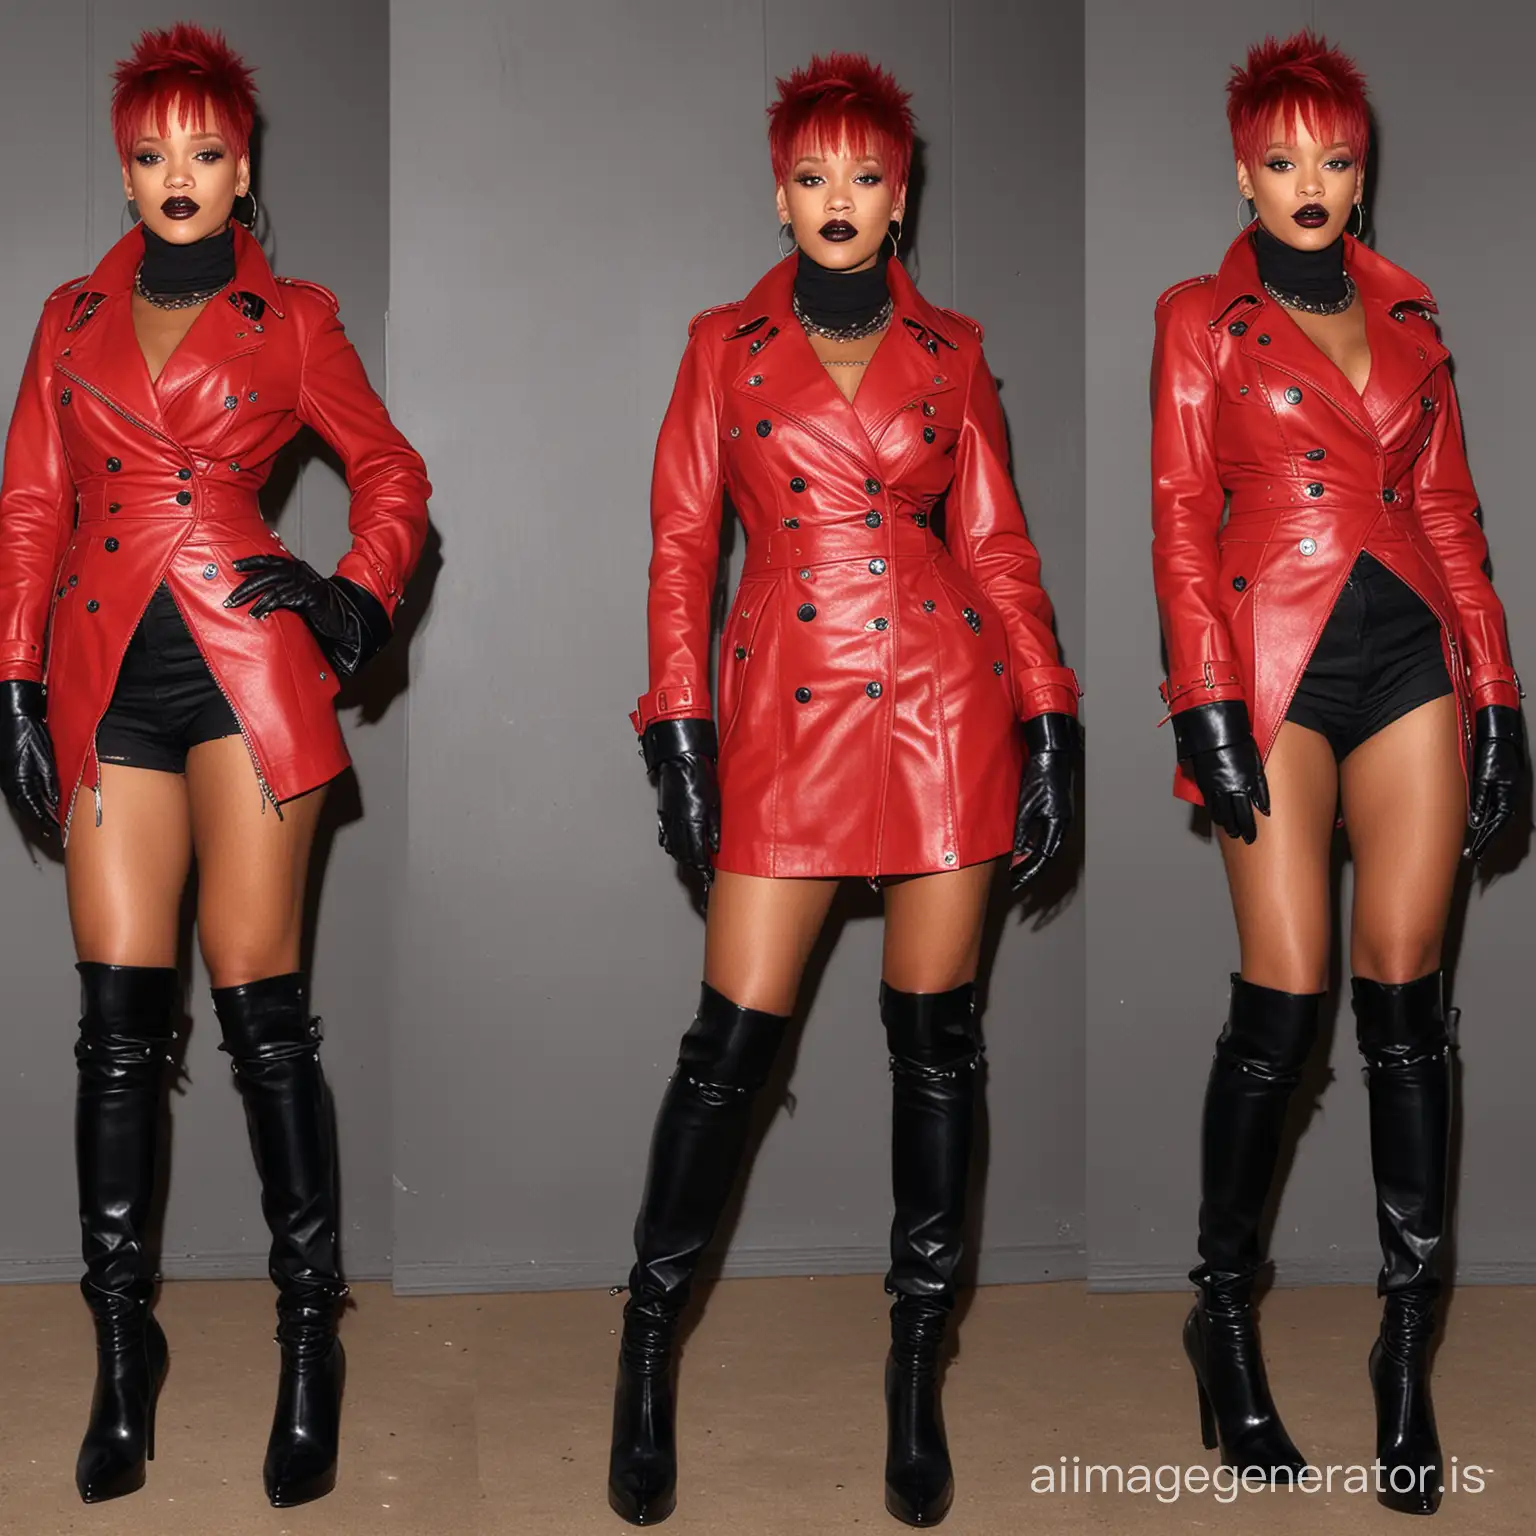 Rihanna-in-Red-Leather-Trench-Coat-and-Punk-Rock-Style